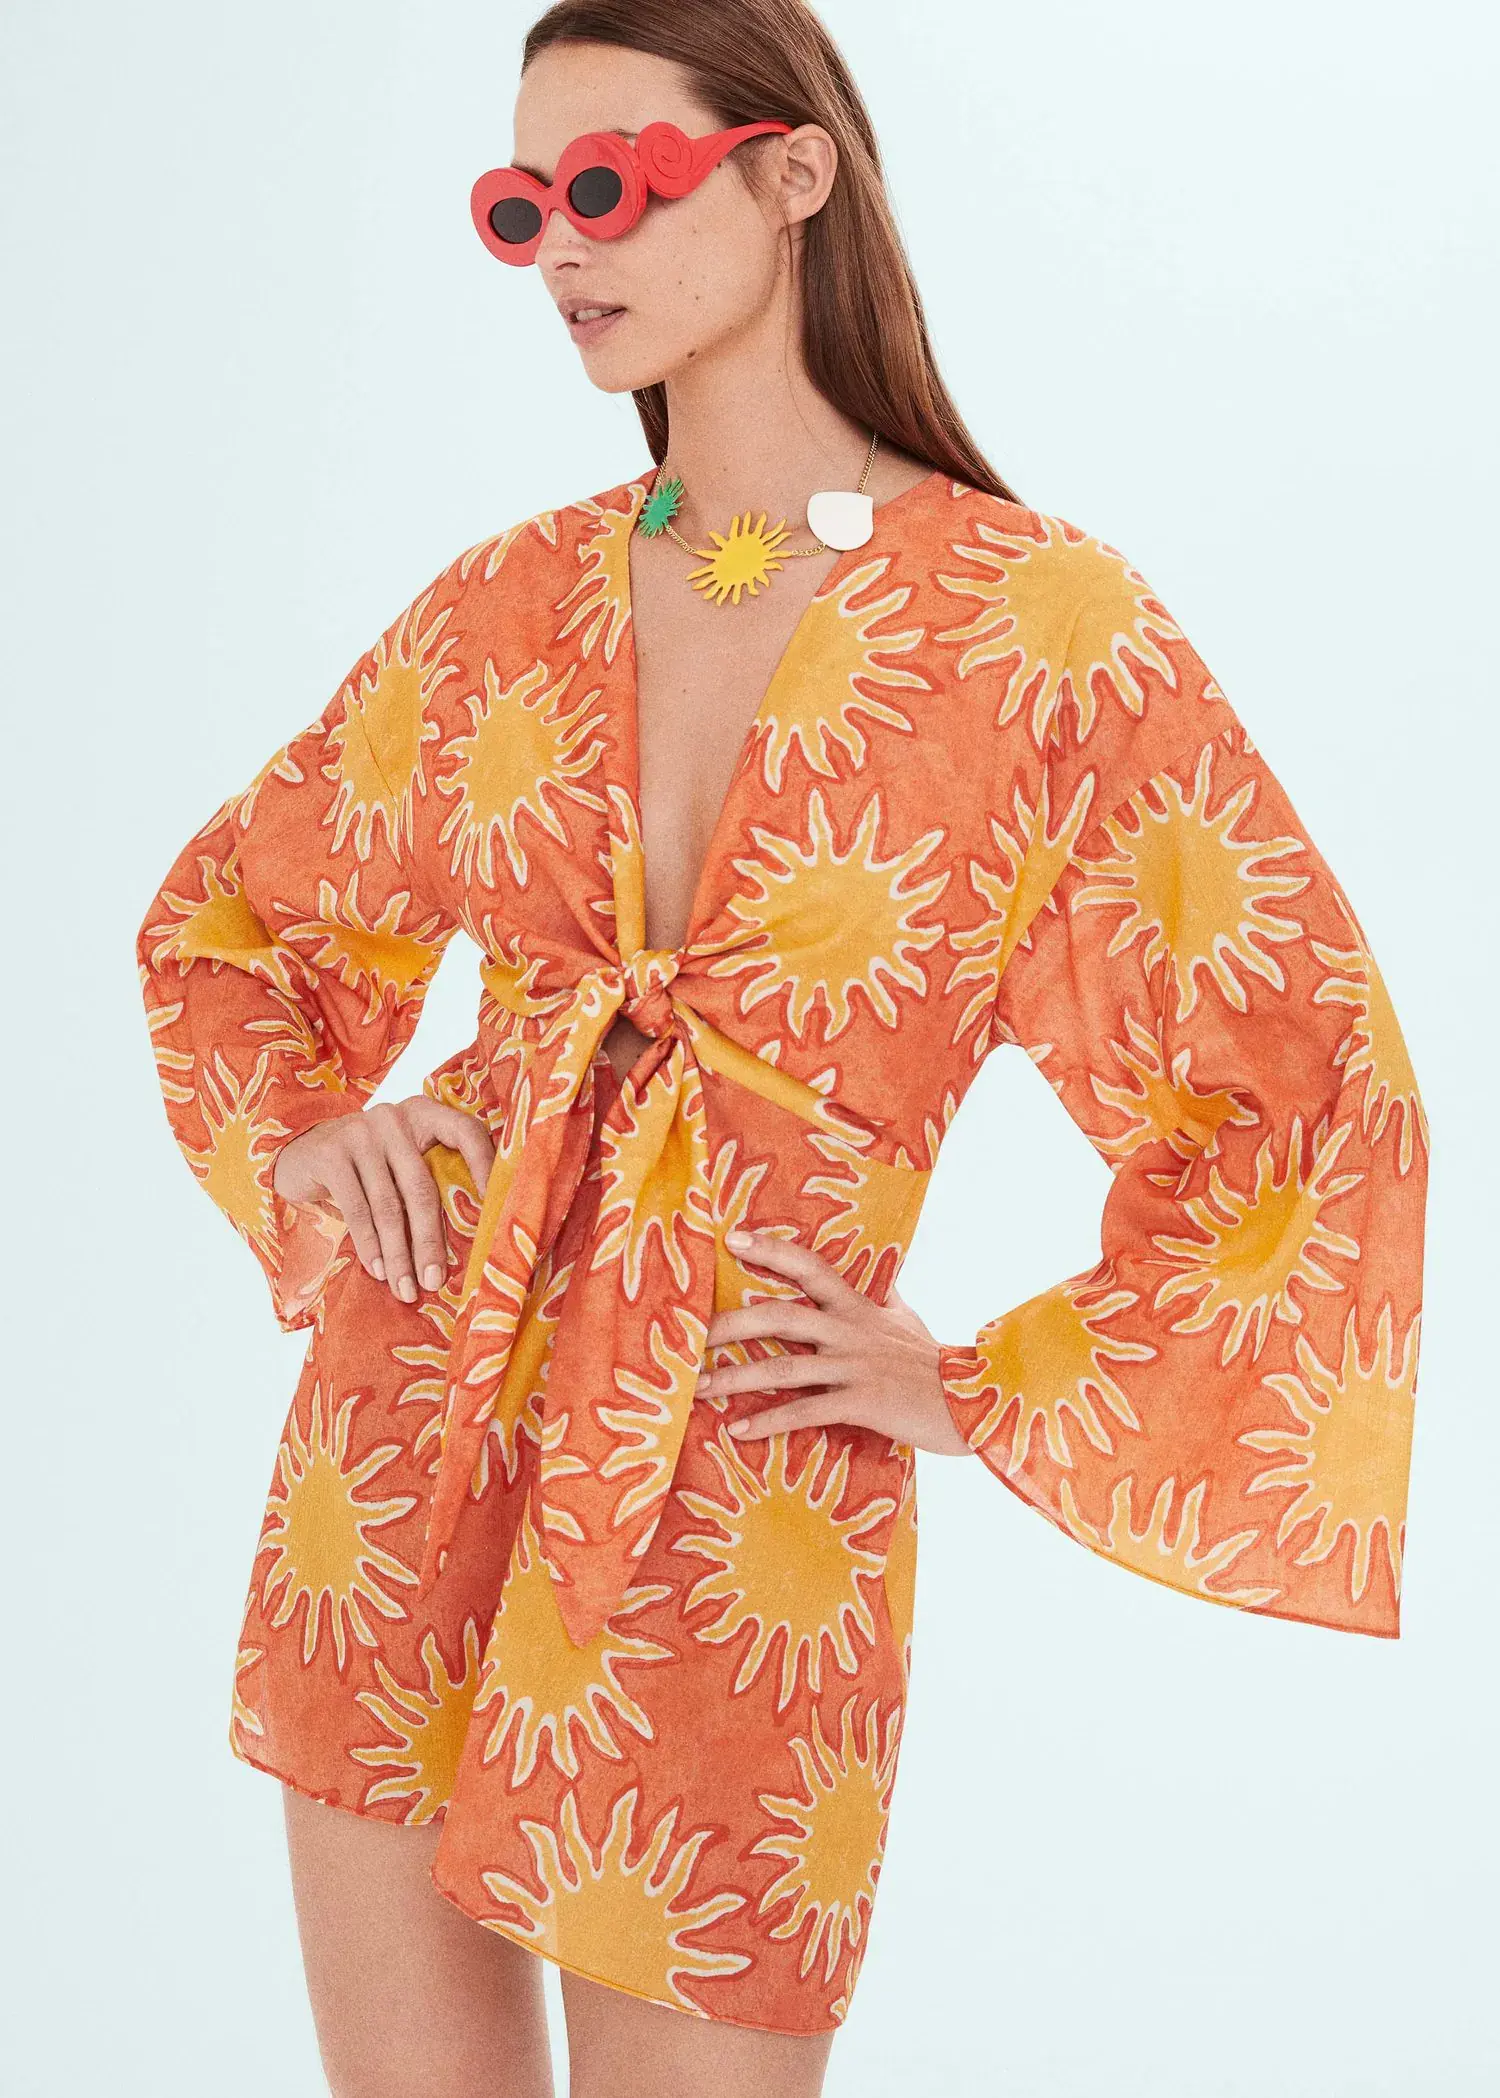 Mango Printed dress with knot detail. a woman in a sun print dress posing for a picture. 